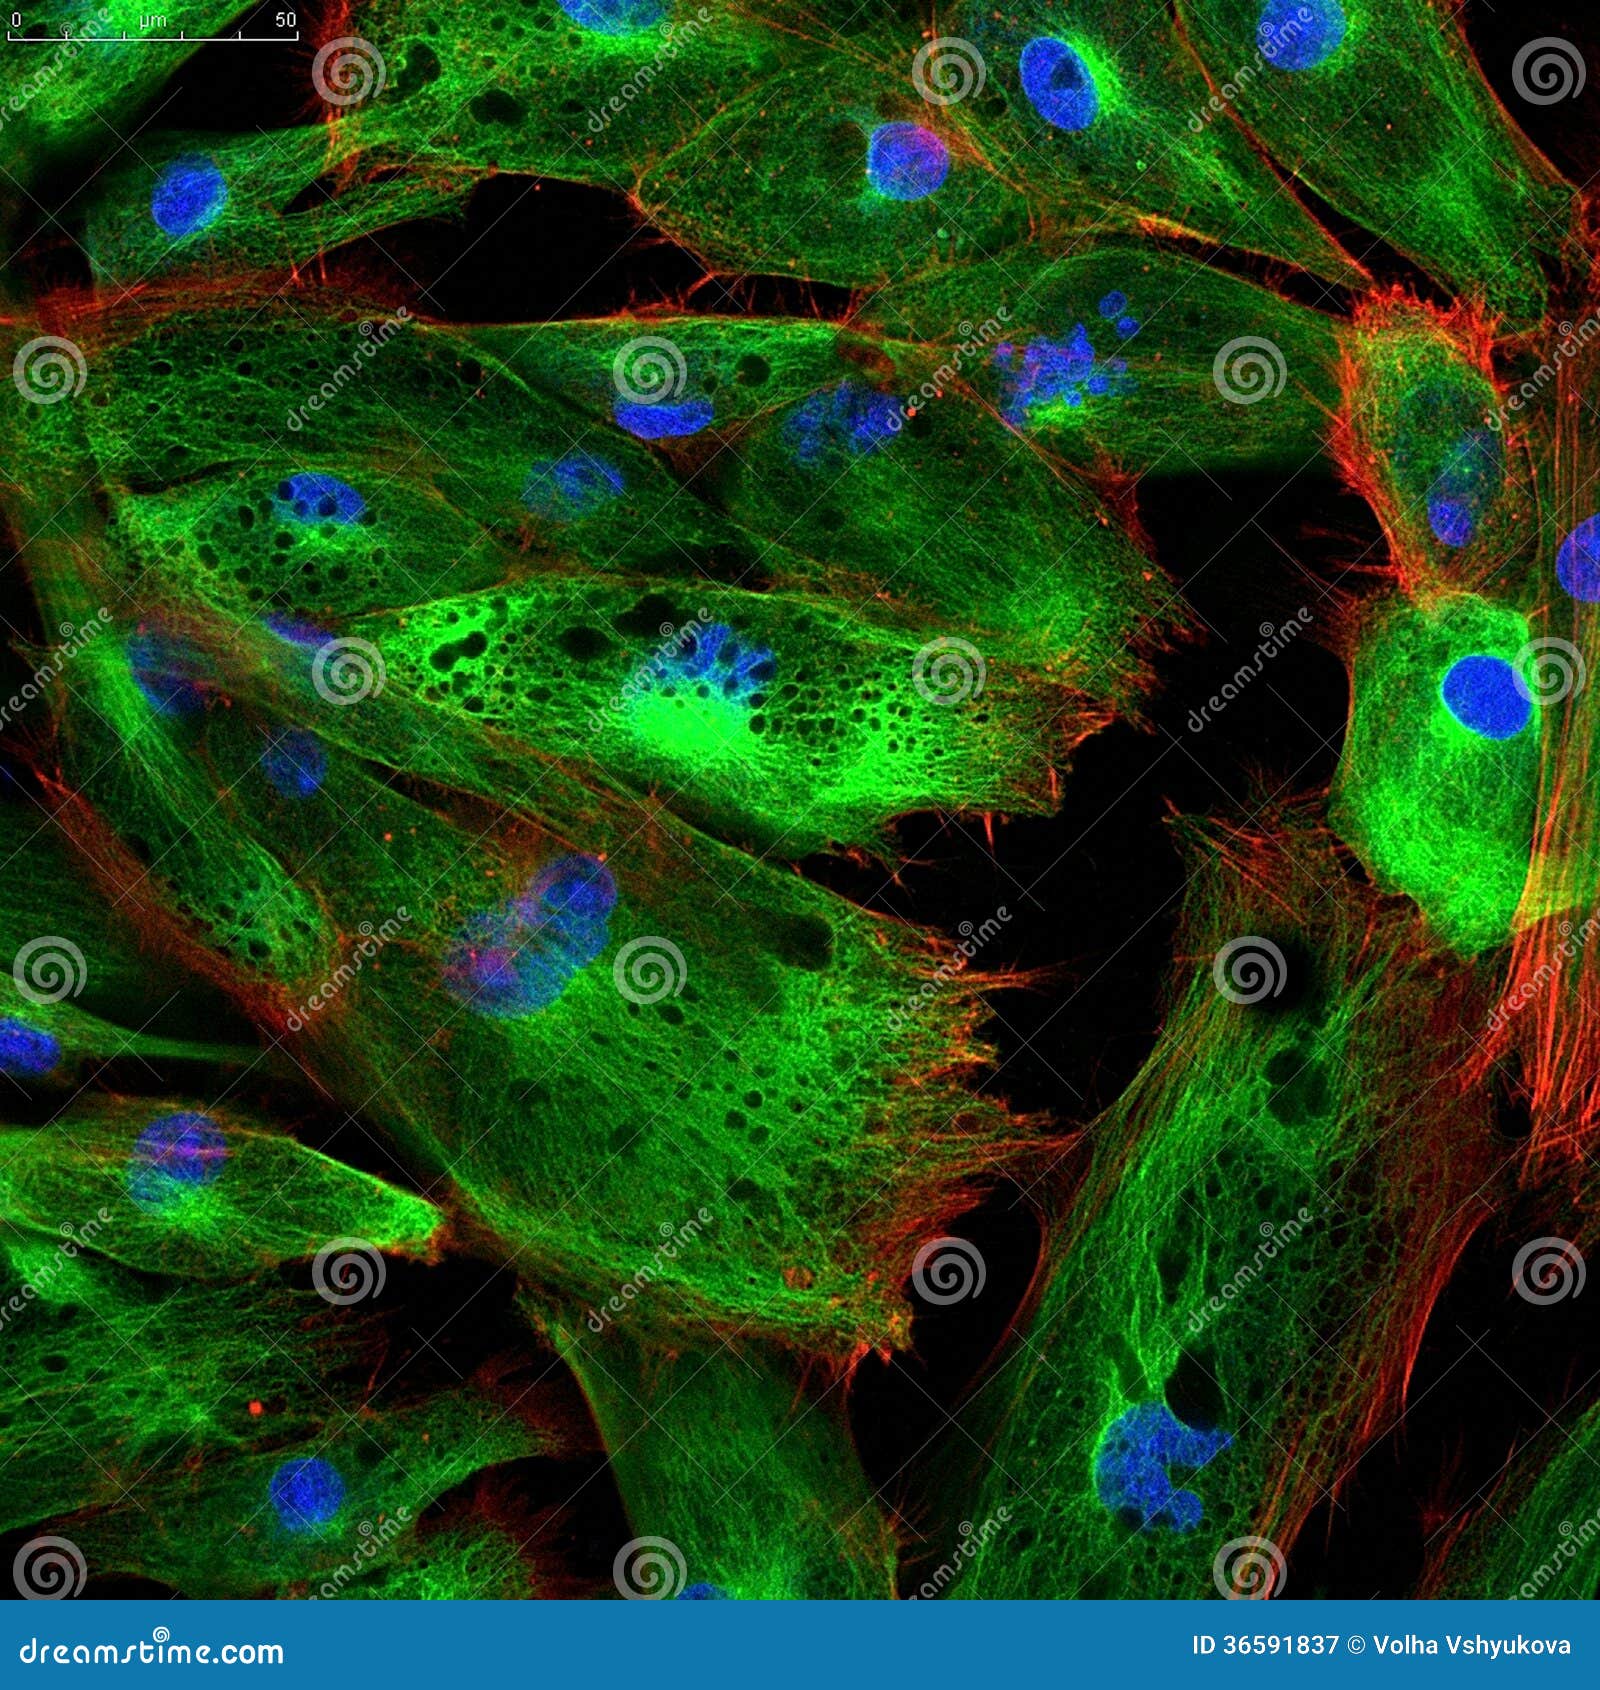 fibroblasts (skin cells) labeled with fluorescent